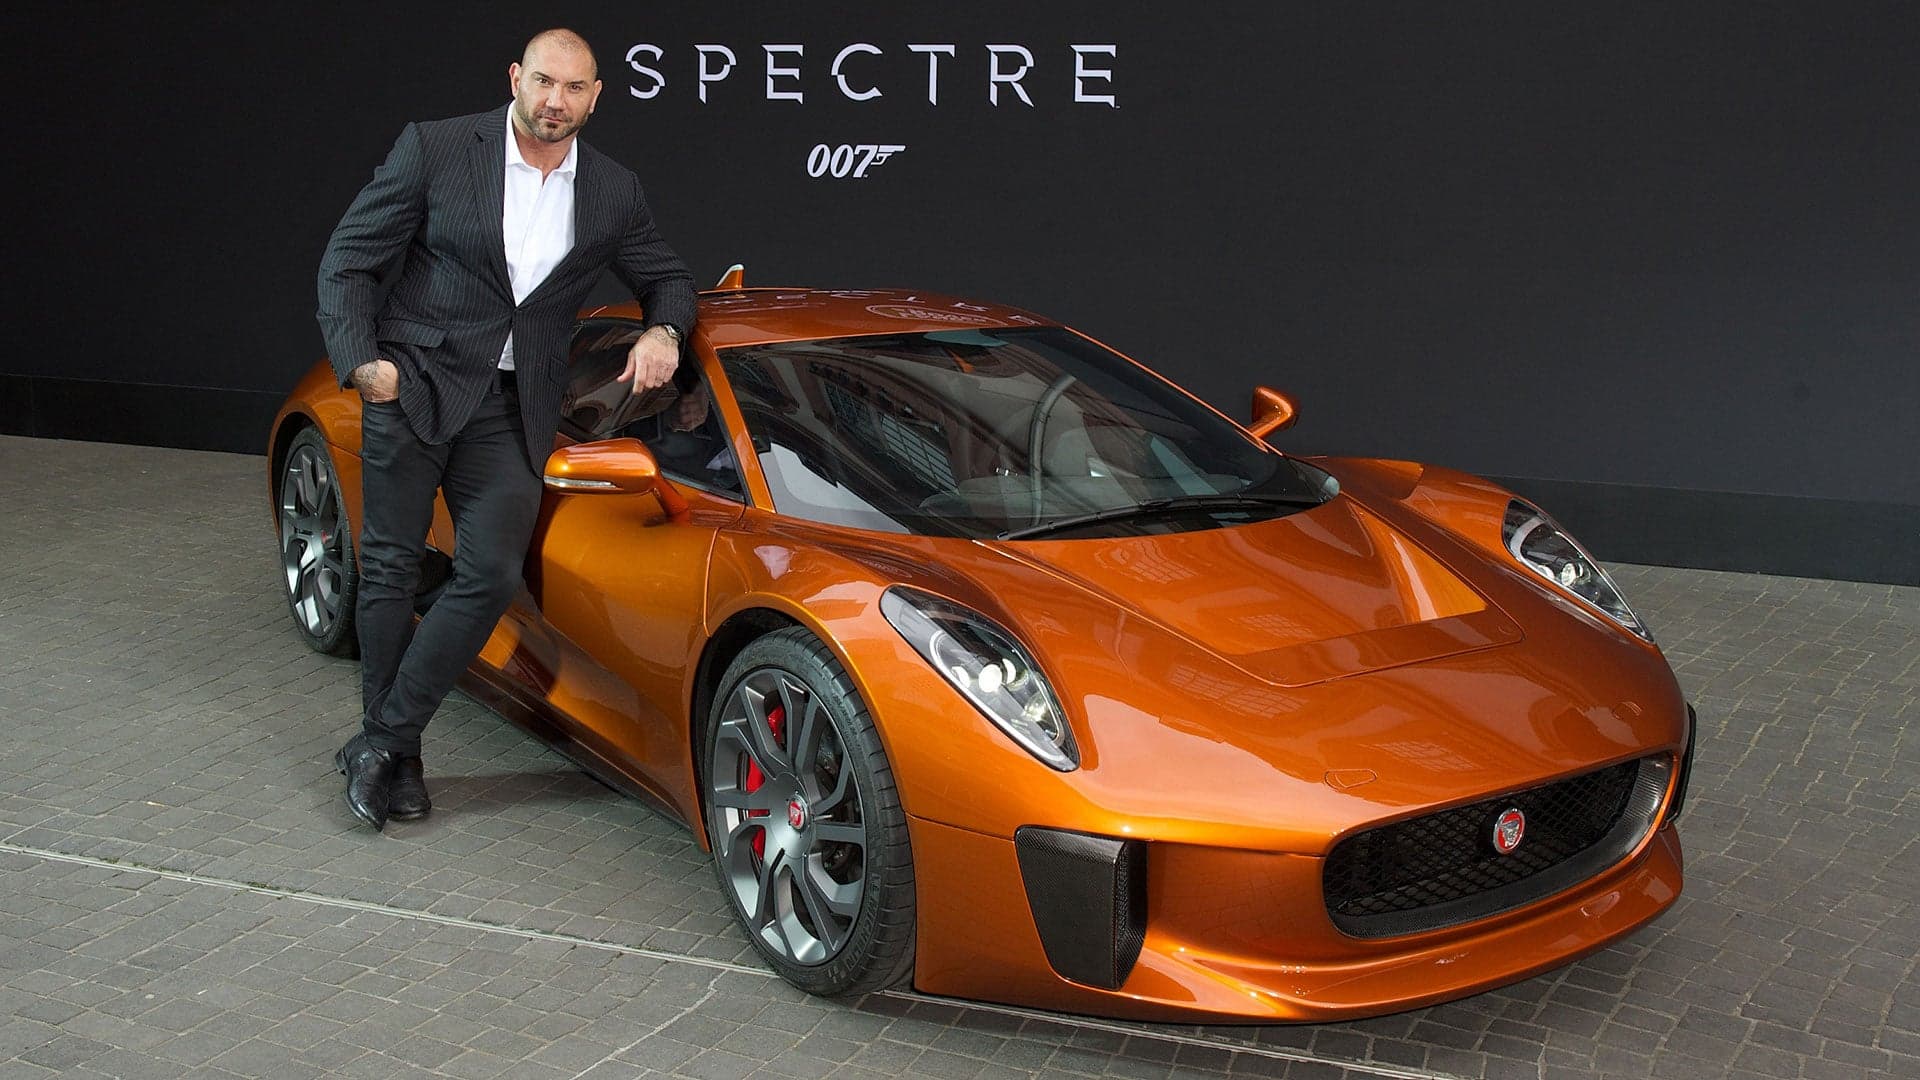 WWE Star Dave Bautista Is the Bond Baddie Behind the Awesome Jaguar C-X75